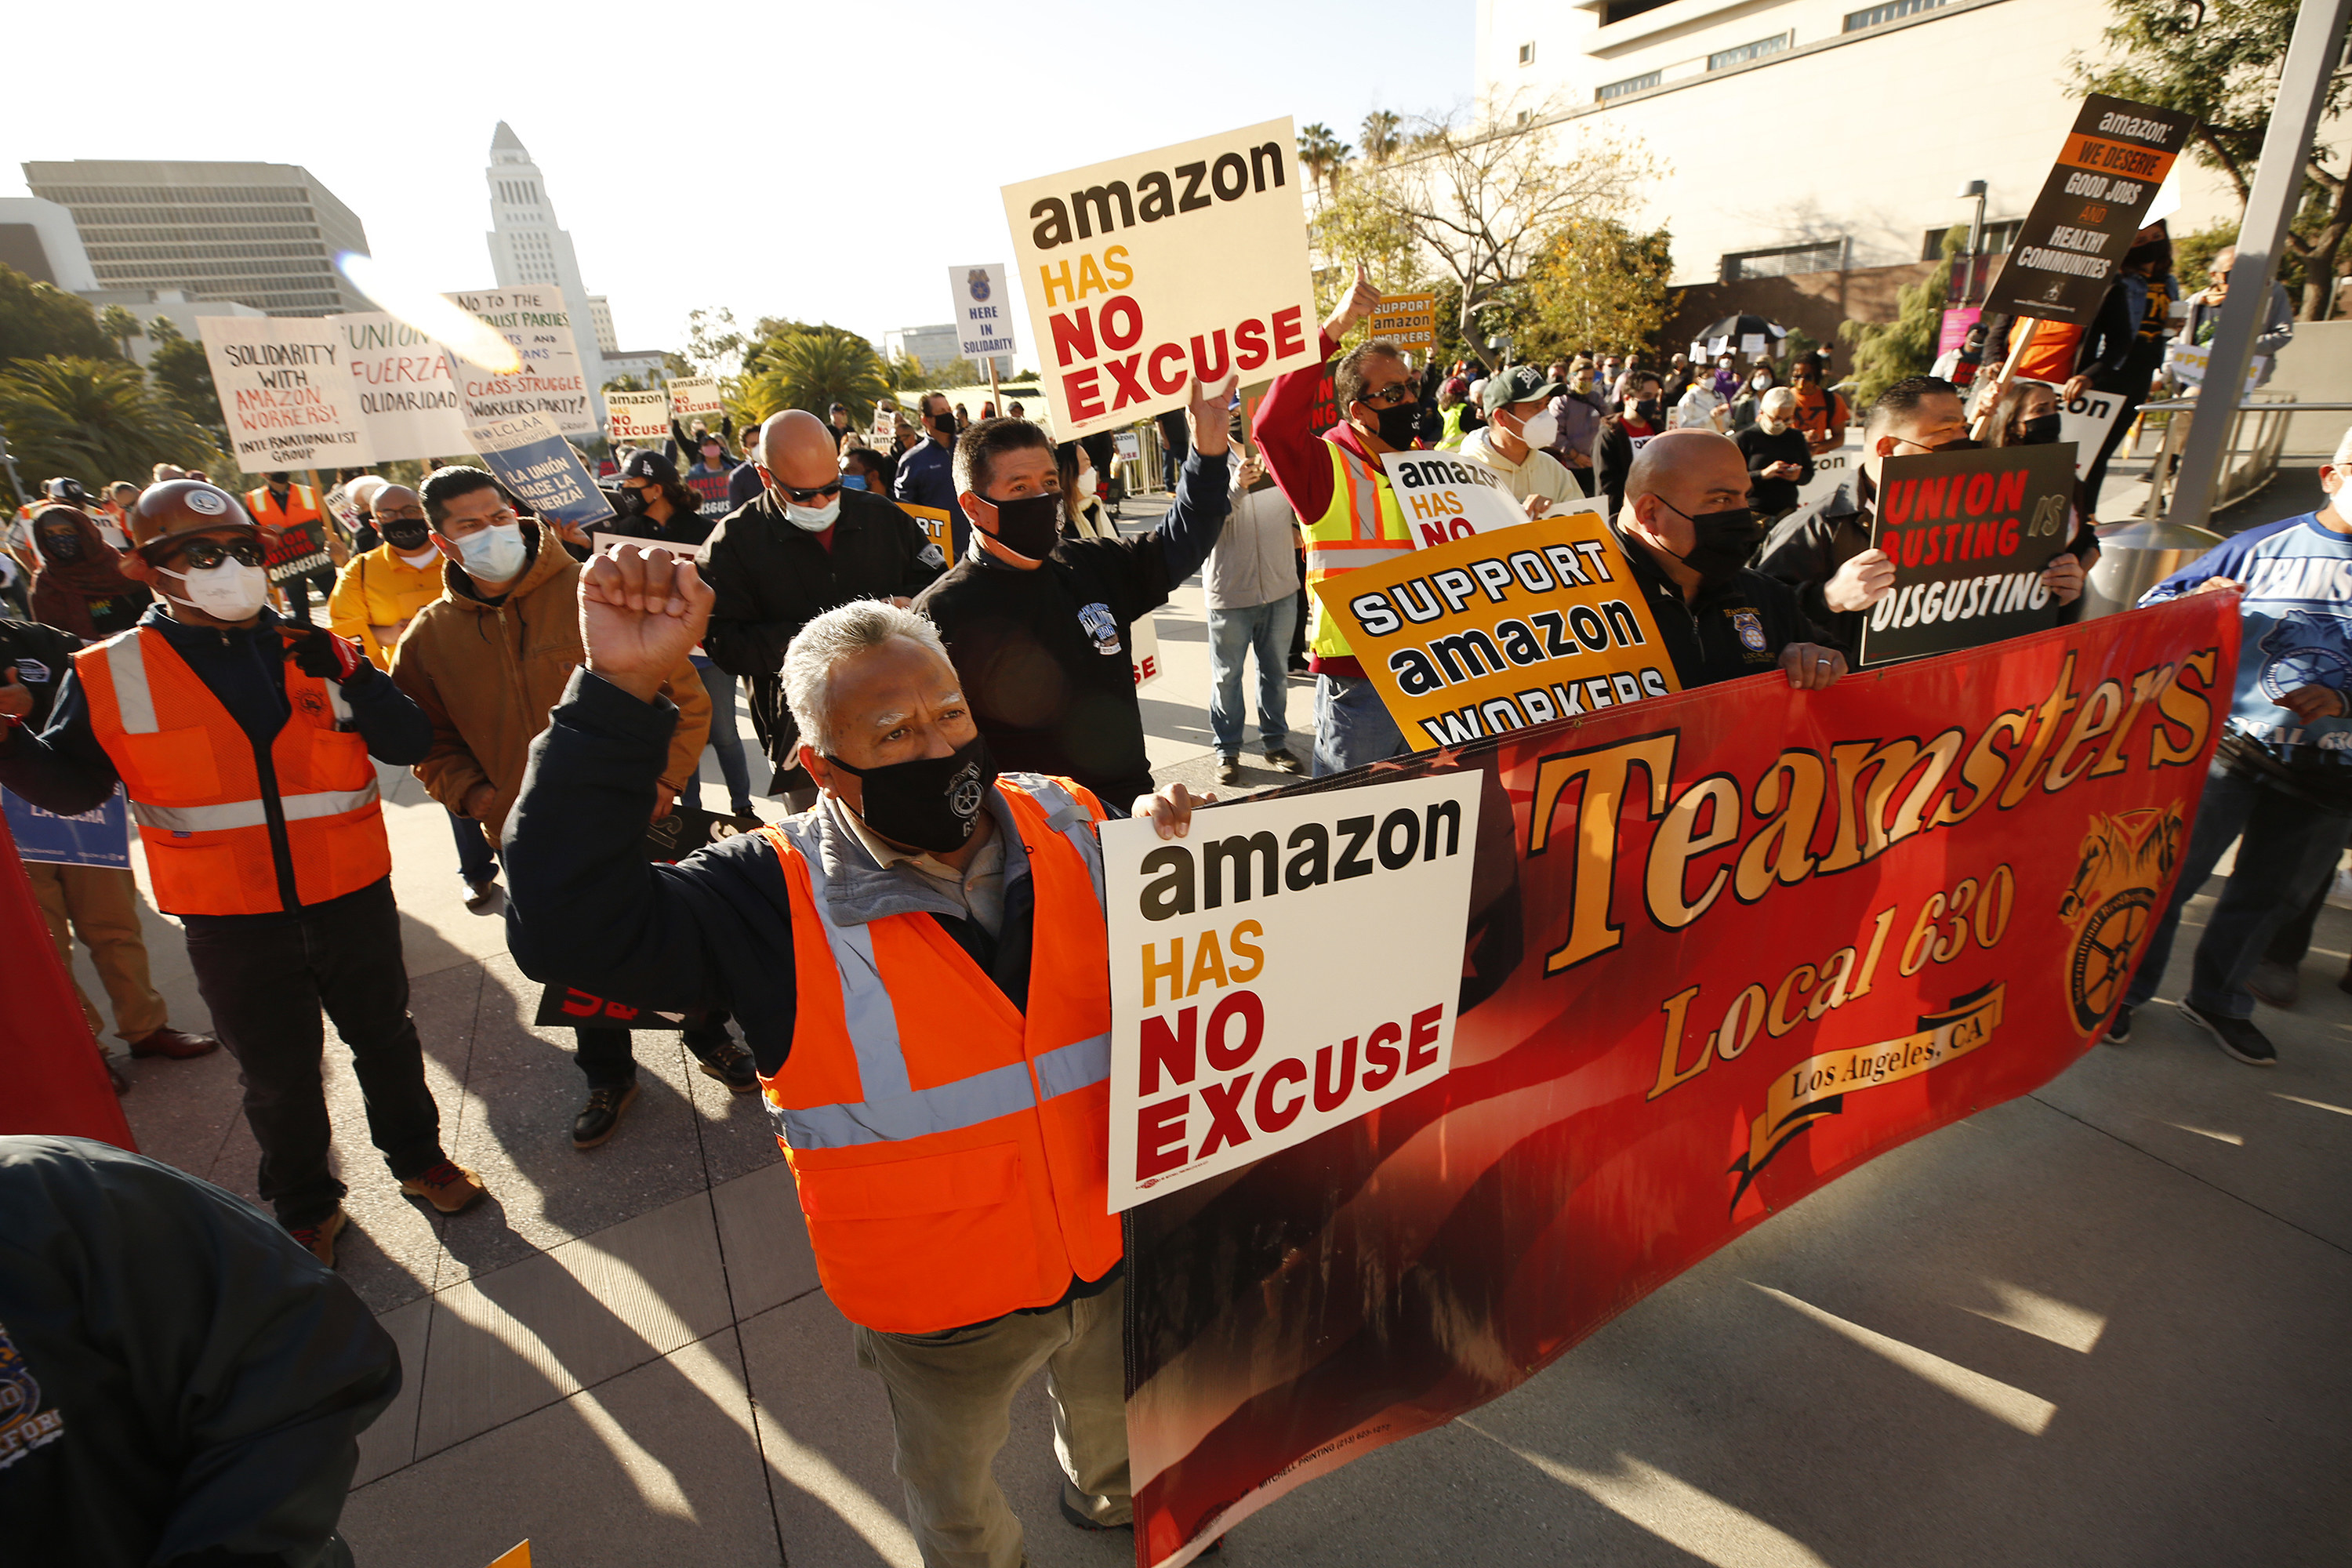 Demonstrators hold up a large banner, signs reading &quot;Amazon has no excuse,&quot; and raise their fists in a protest